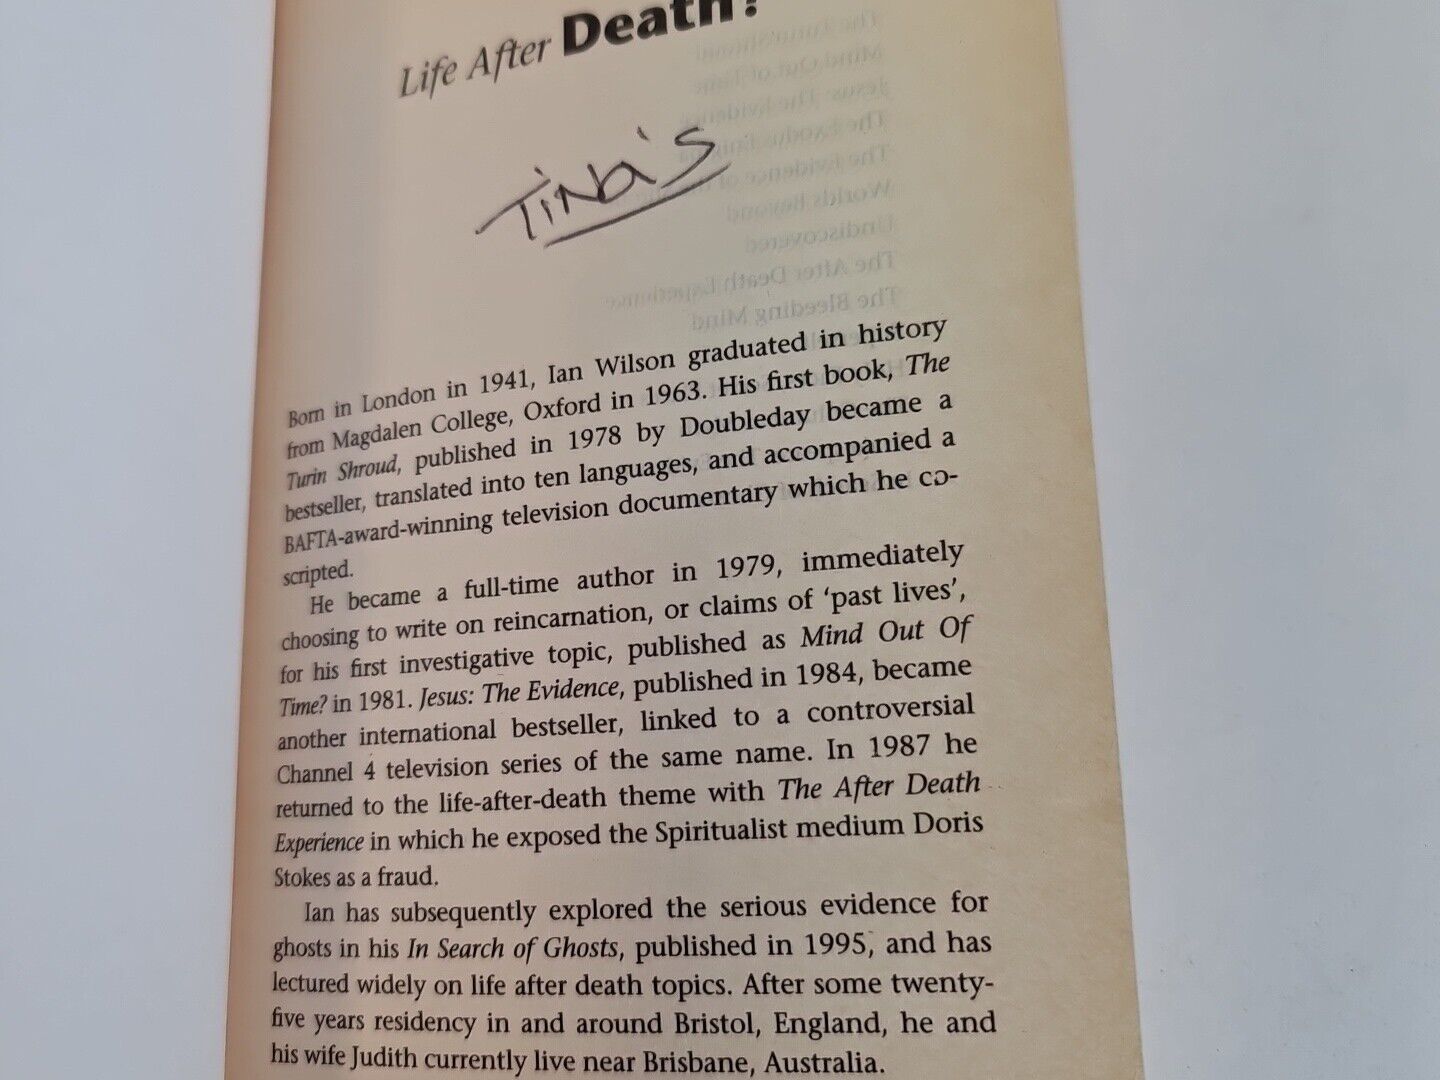 Life After Death: The Evidence by Ian Wilson (1998)